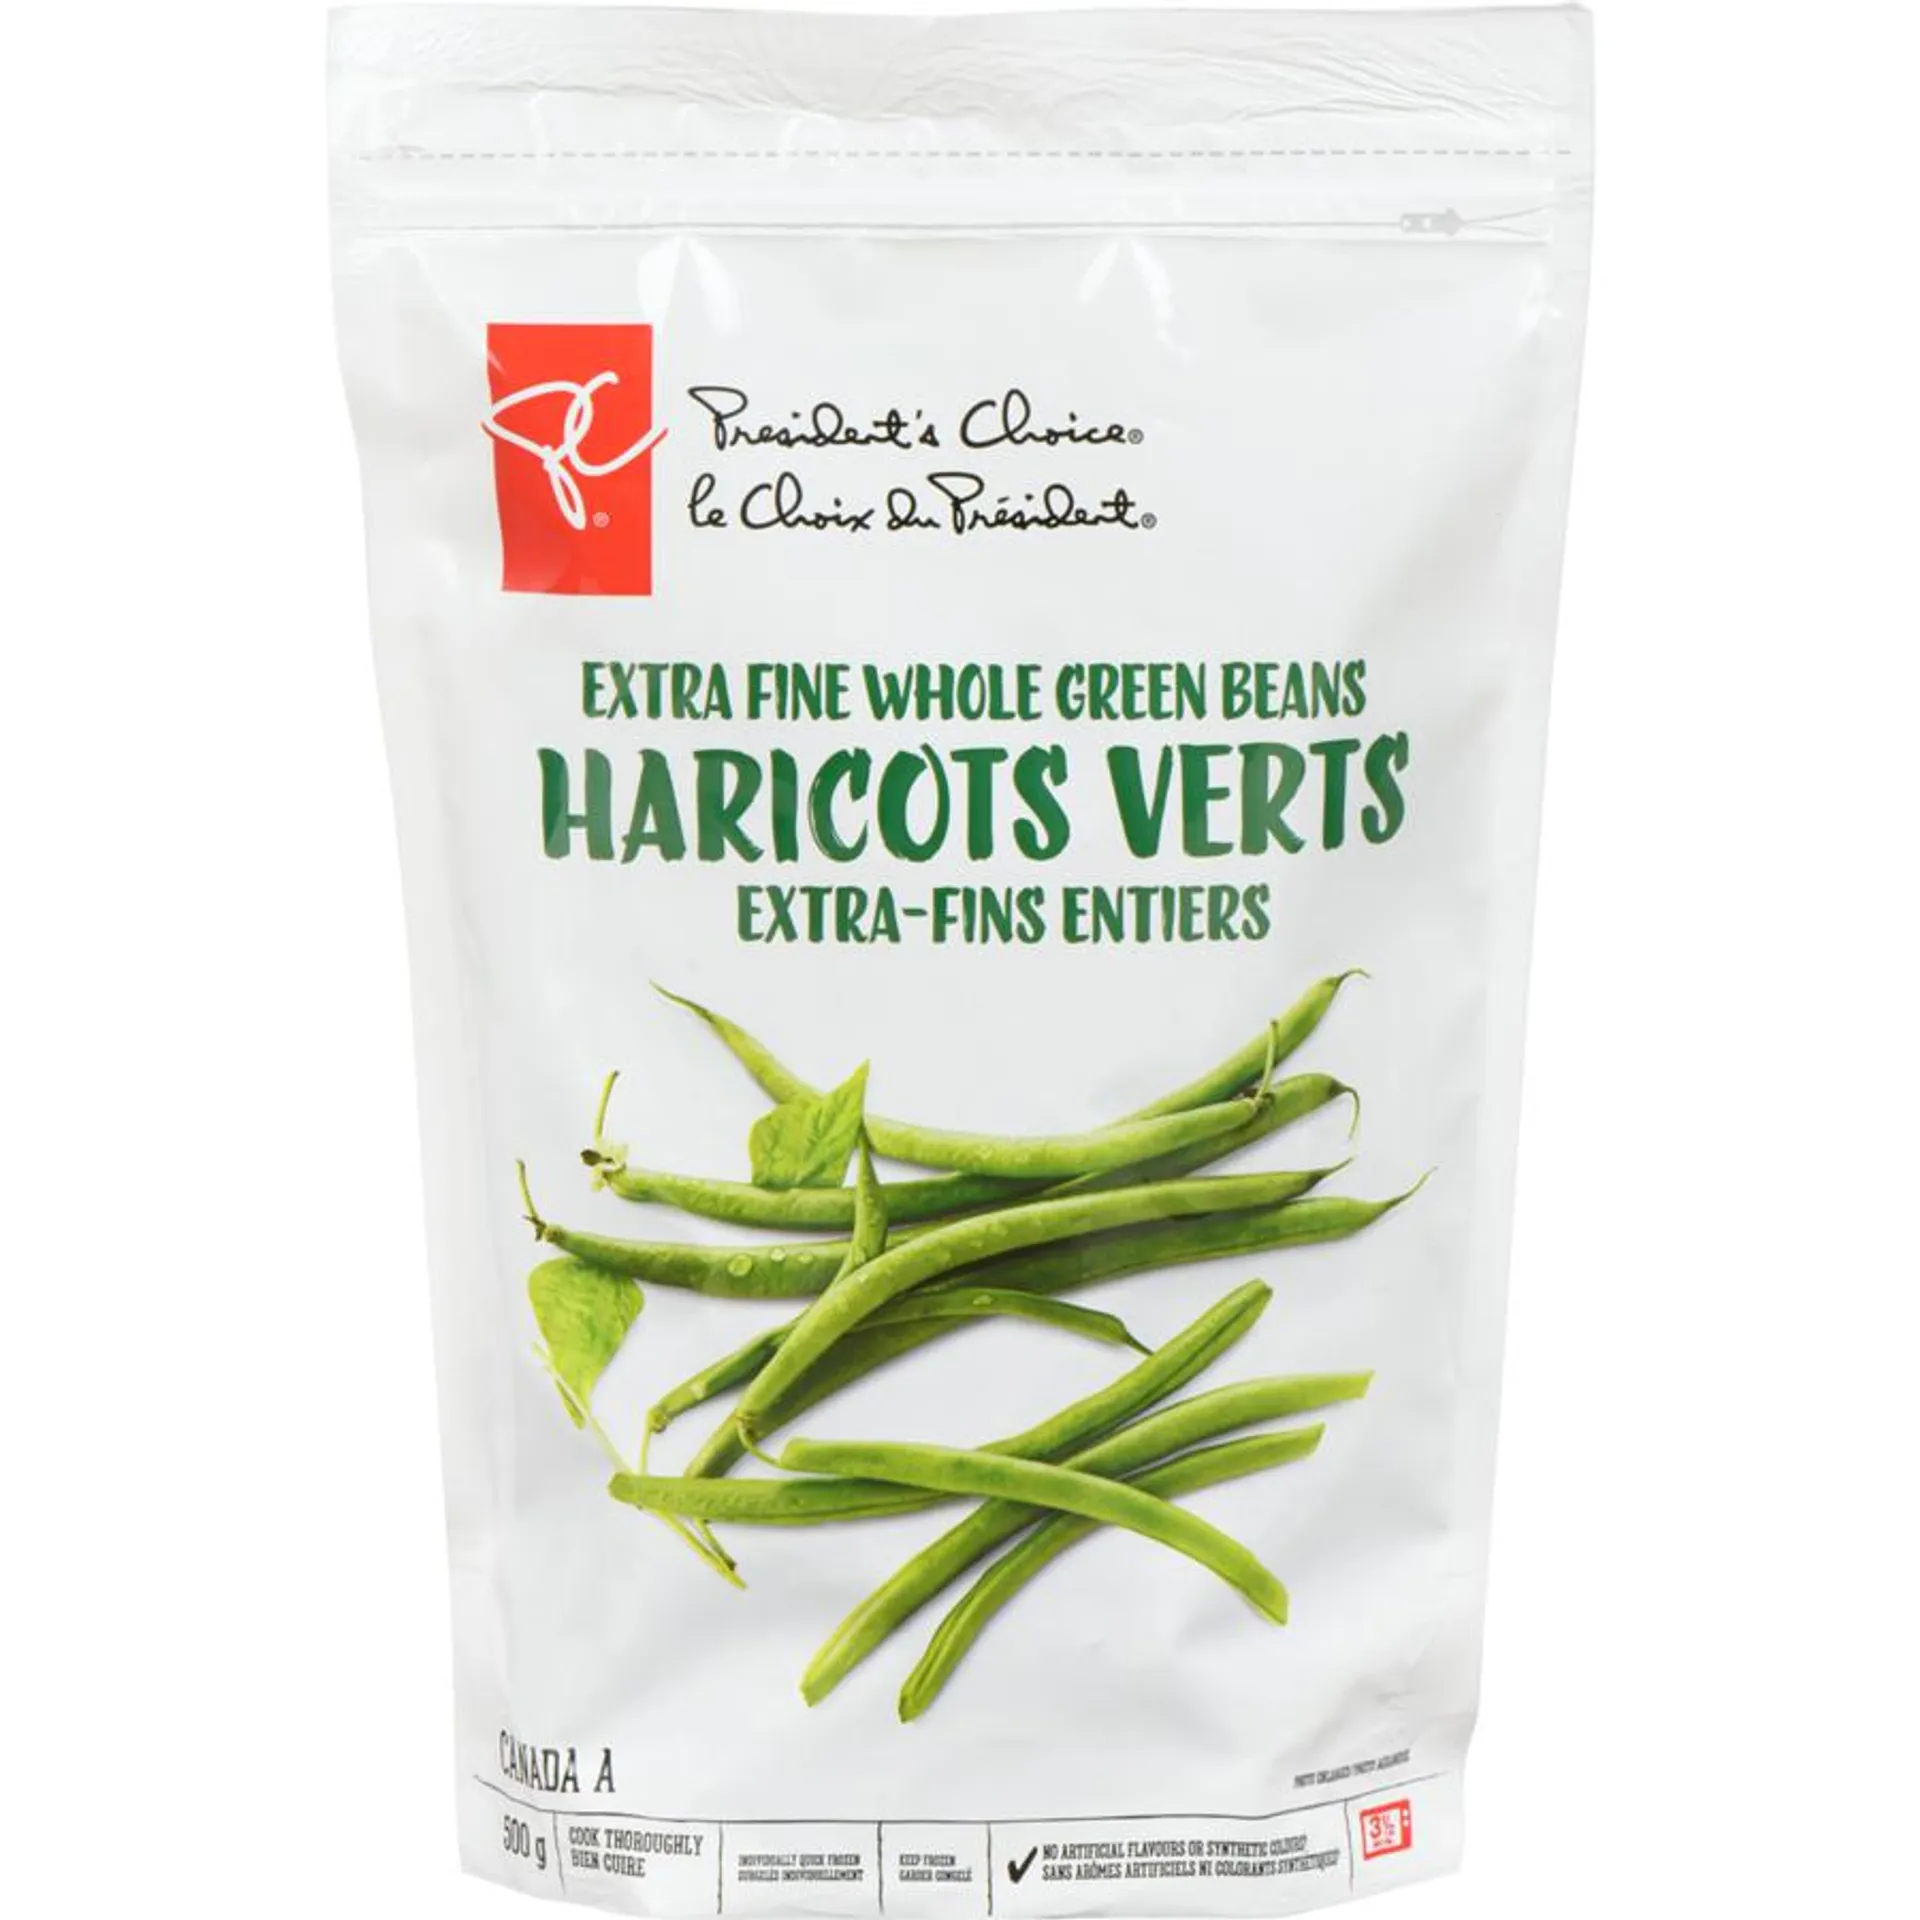 Extra Fine Whole Green Beans